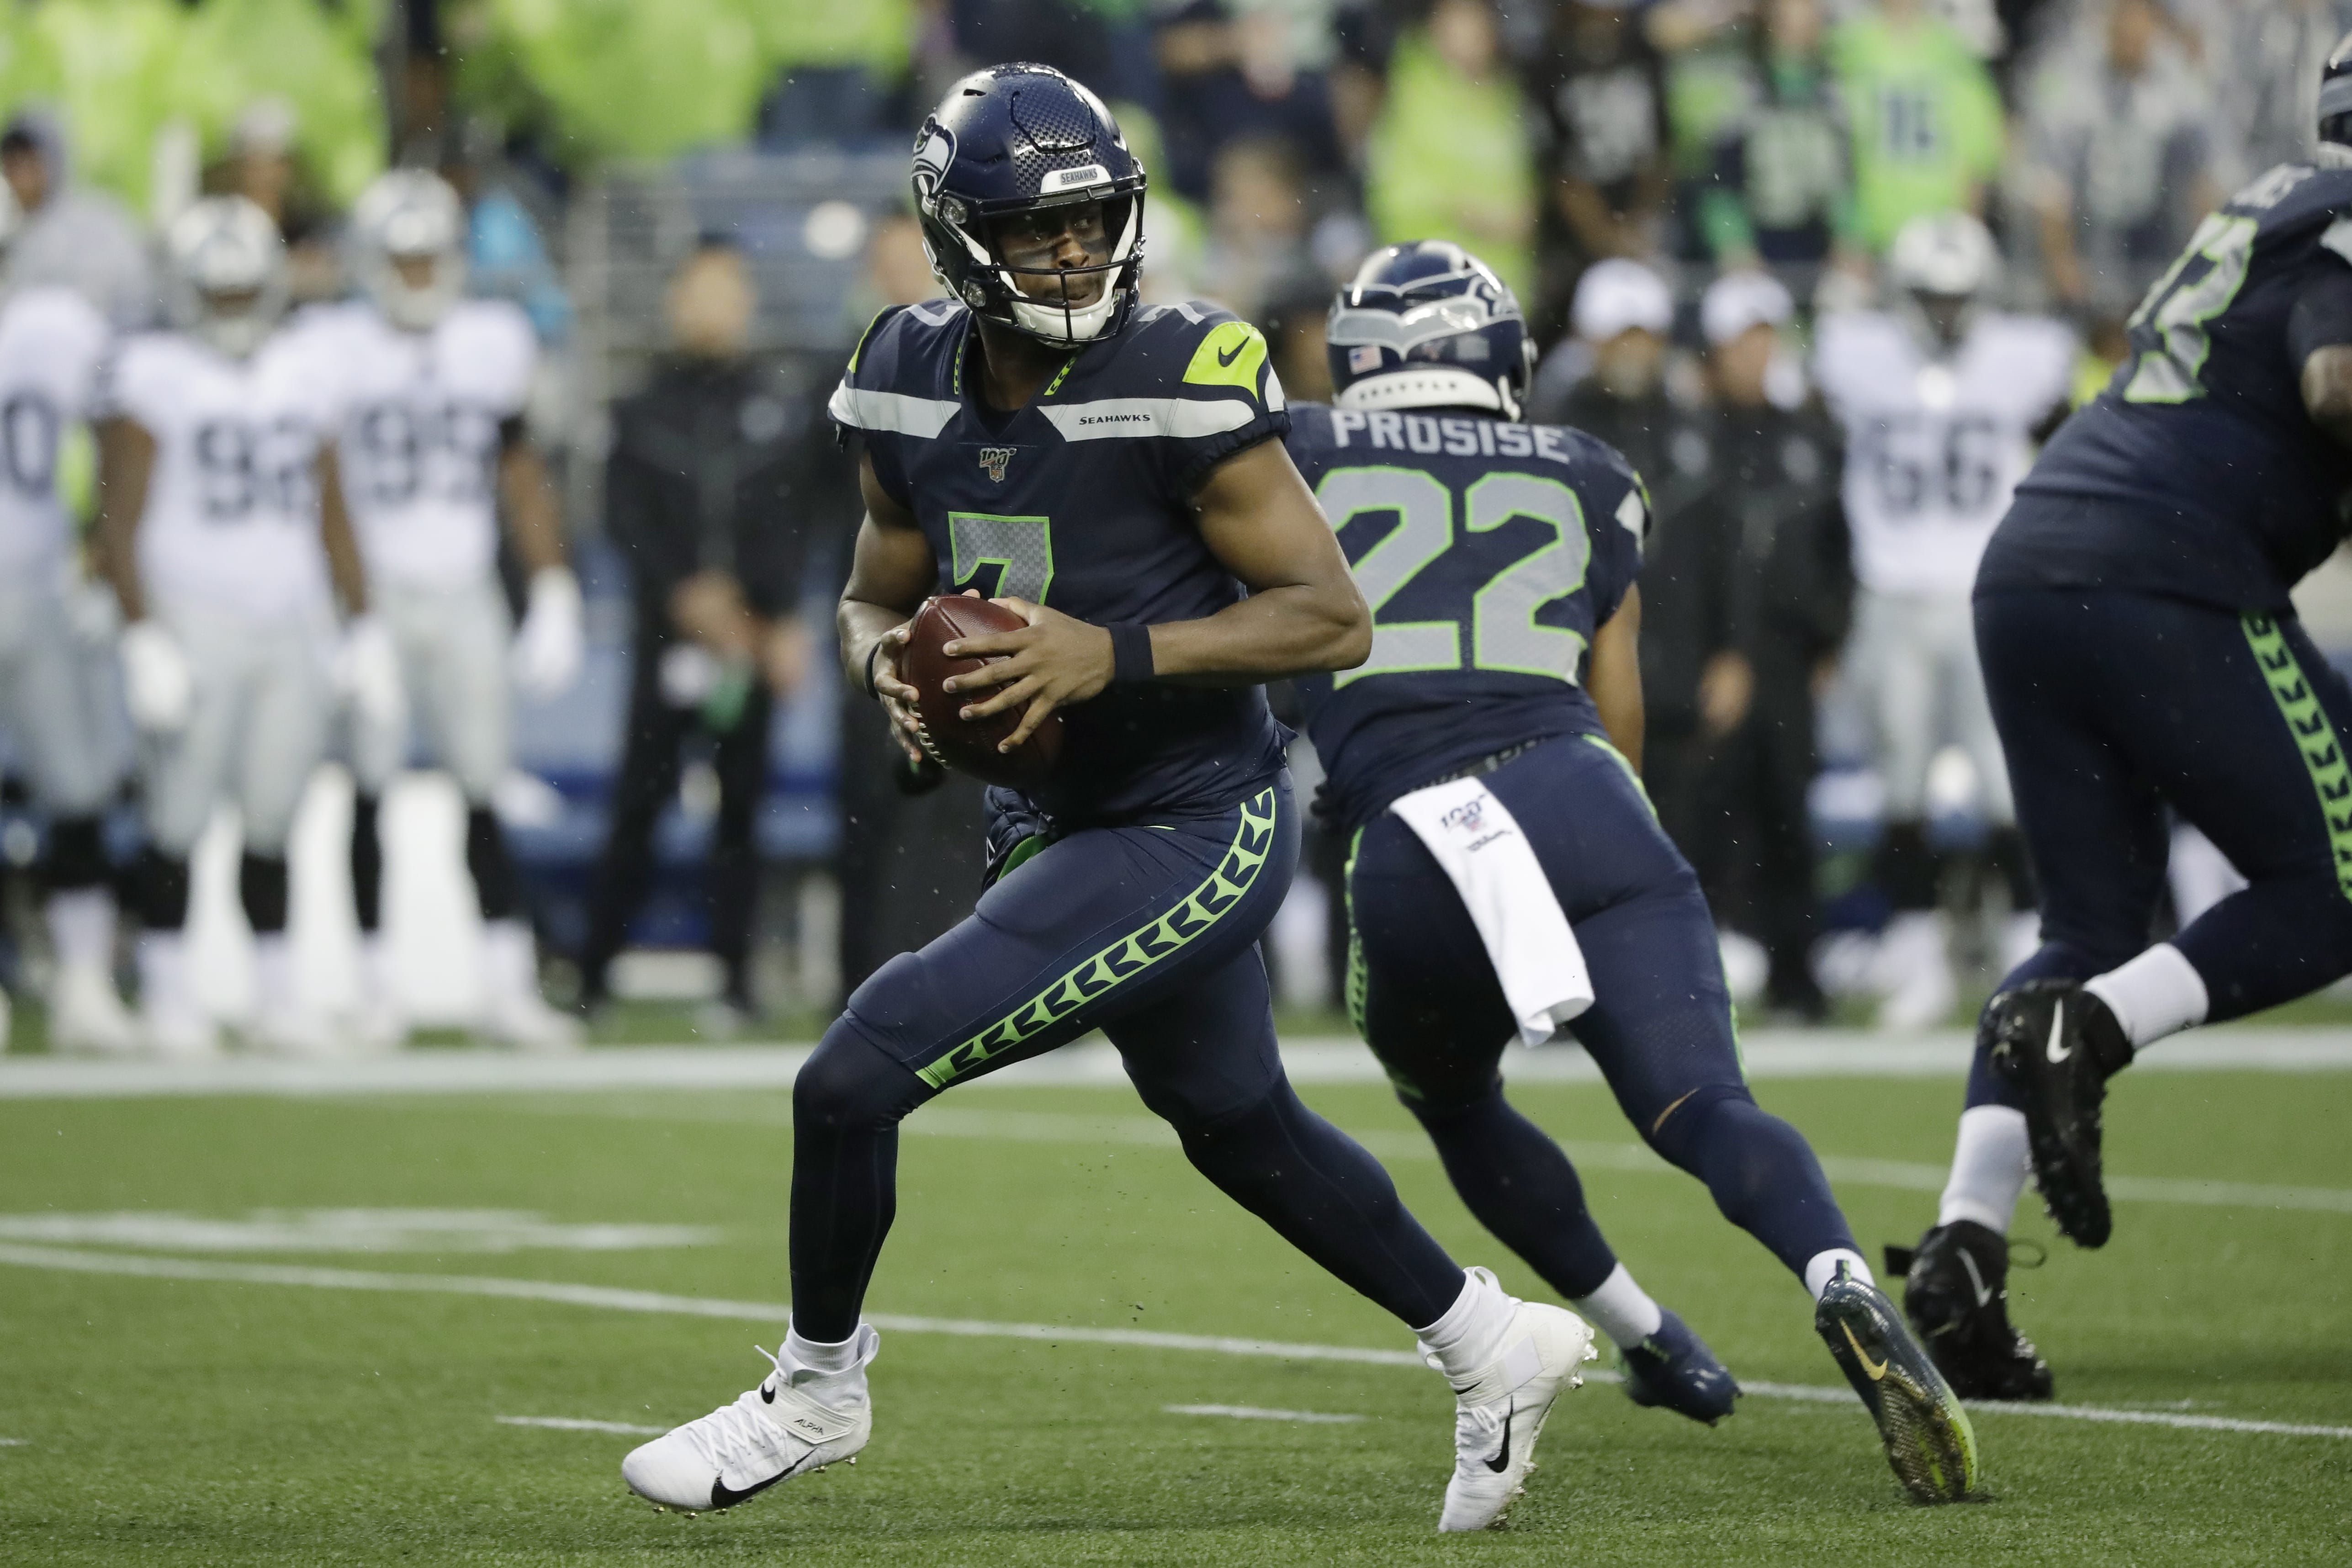 Seattle Seahawks quarterback Geno Smith drops back during the first half of the team's NFL football preseason game against the Oakland Raiders, Thursday, Aug. 29, 2019, in Seattle.